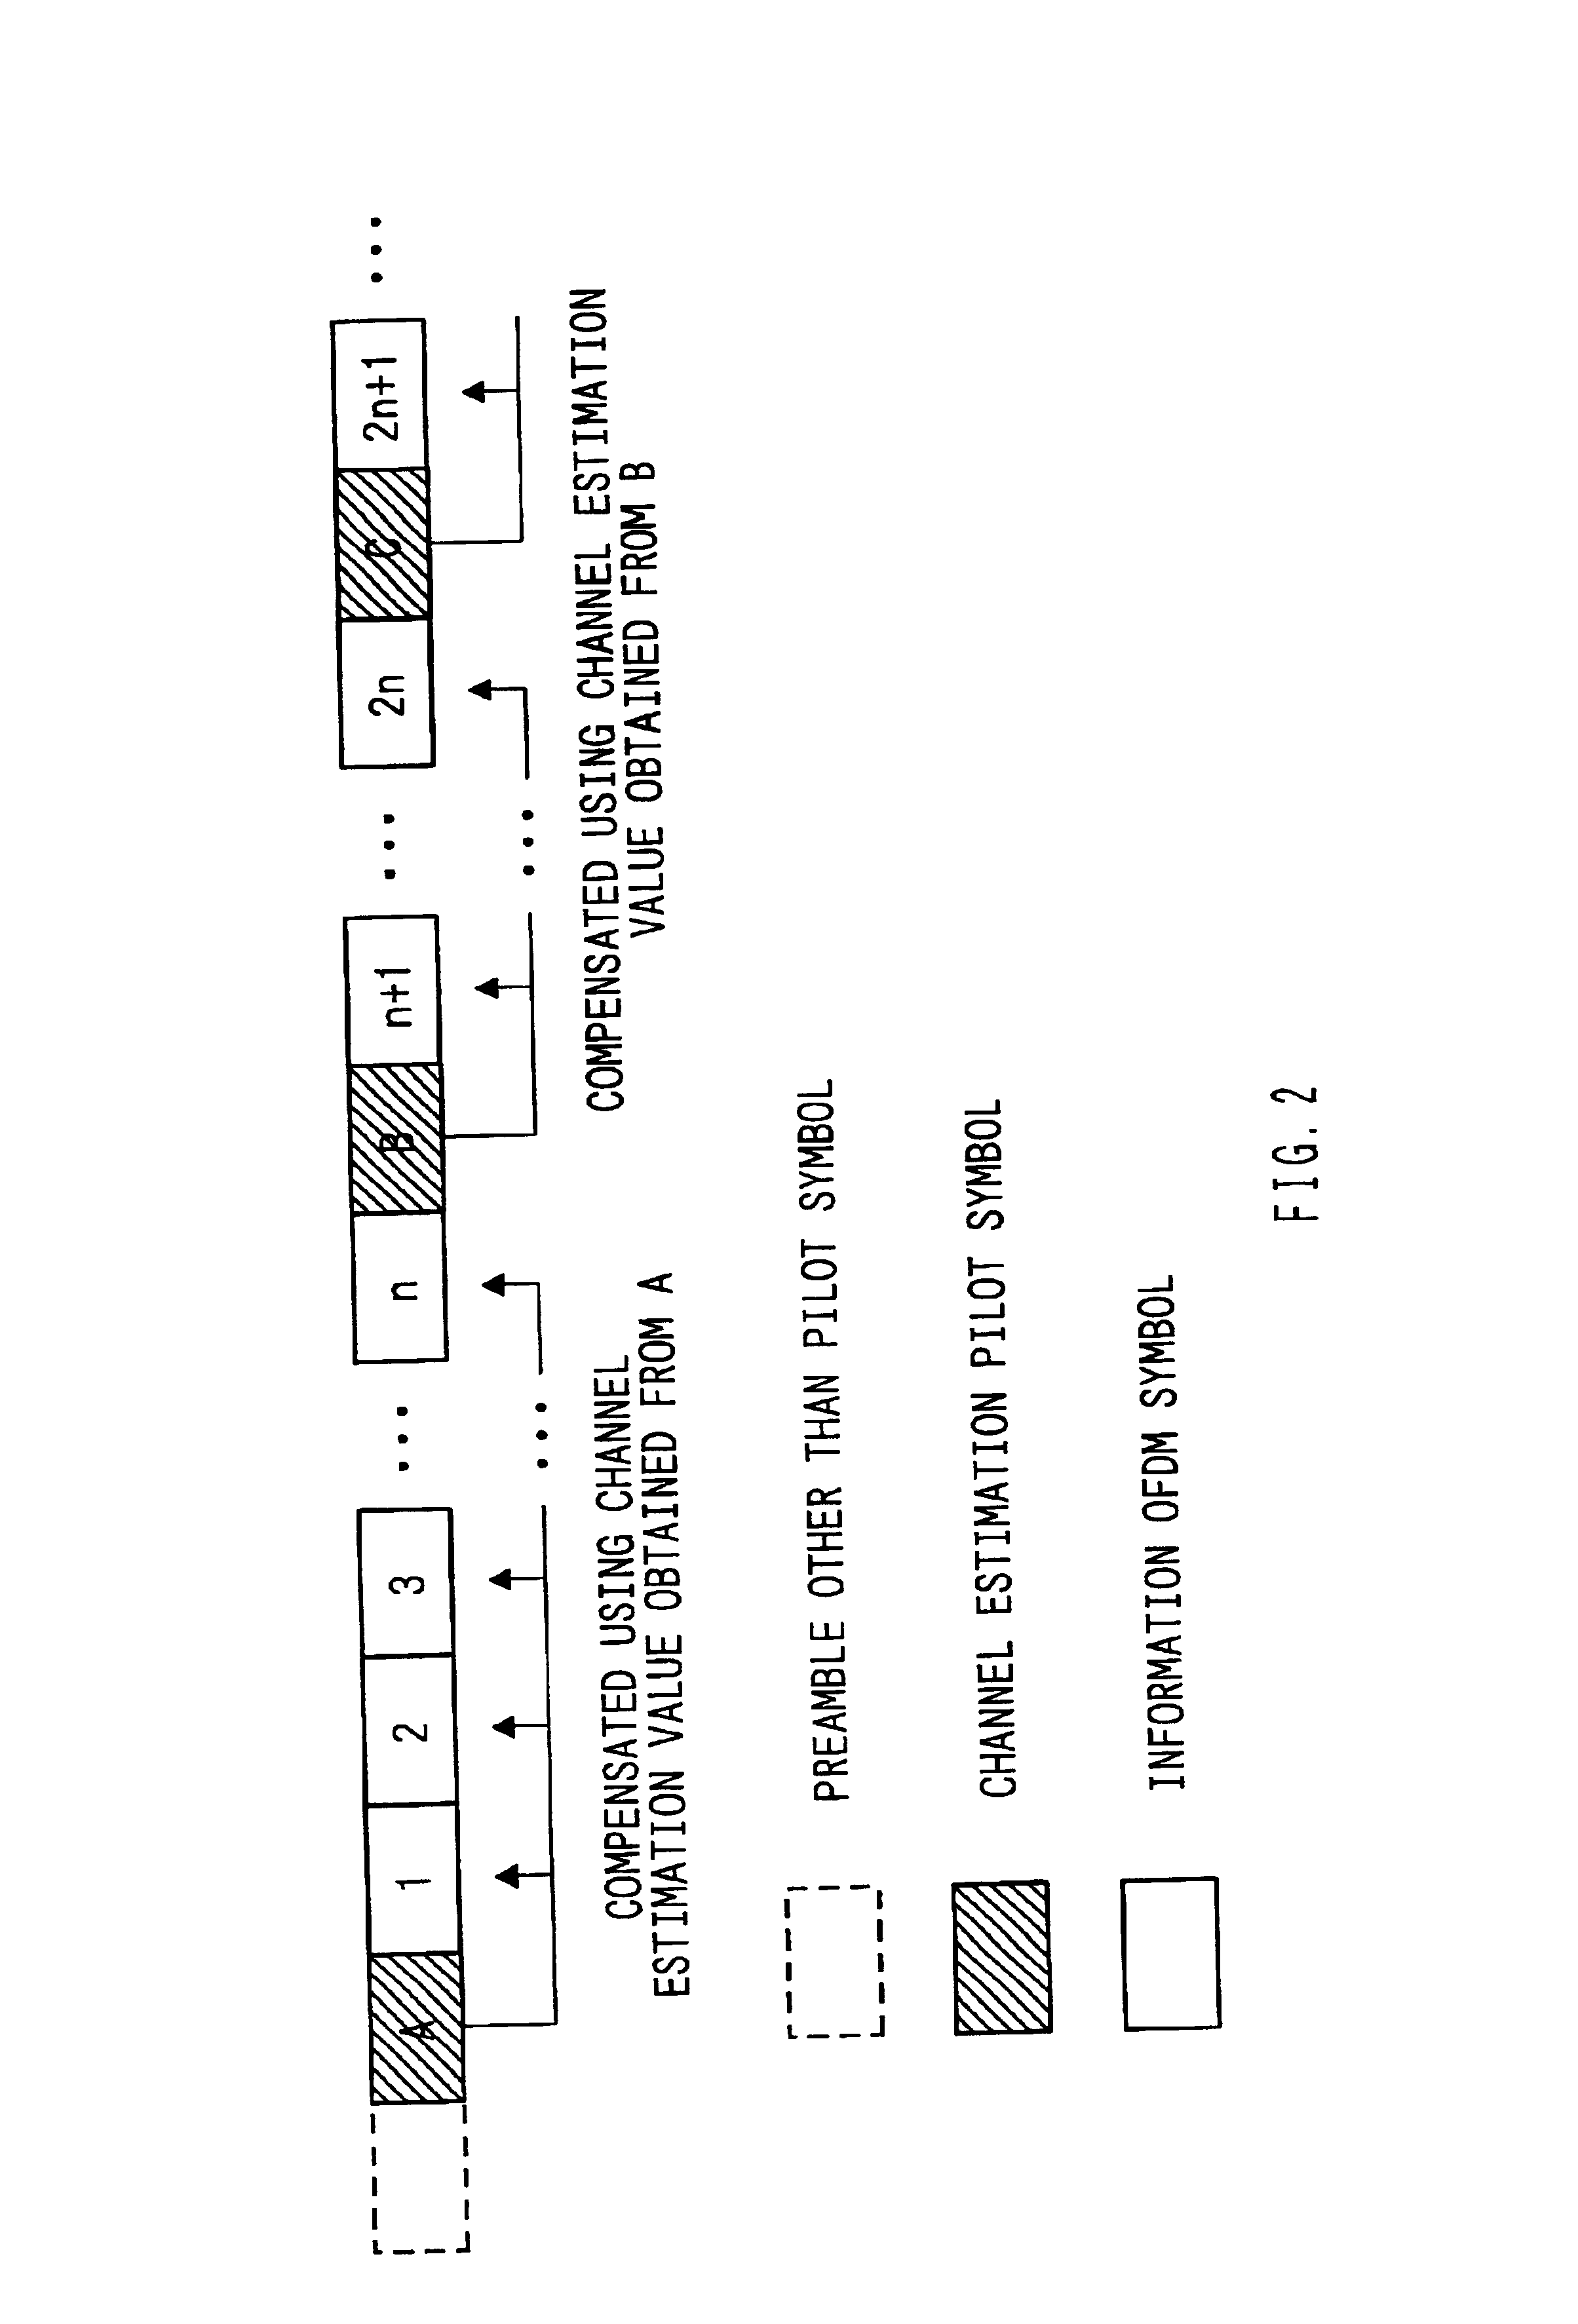 OFDM communication device and detecting method